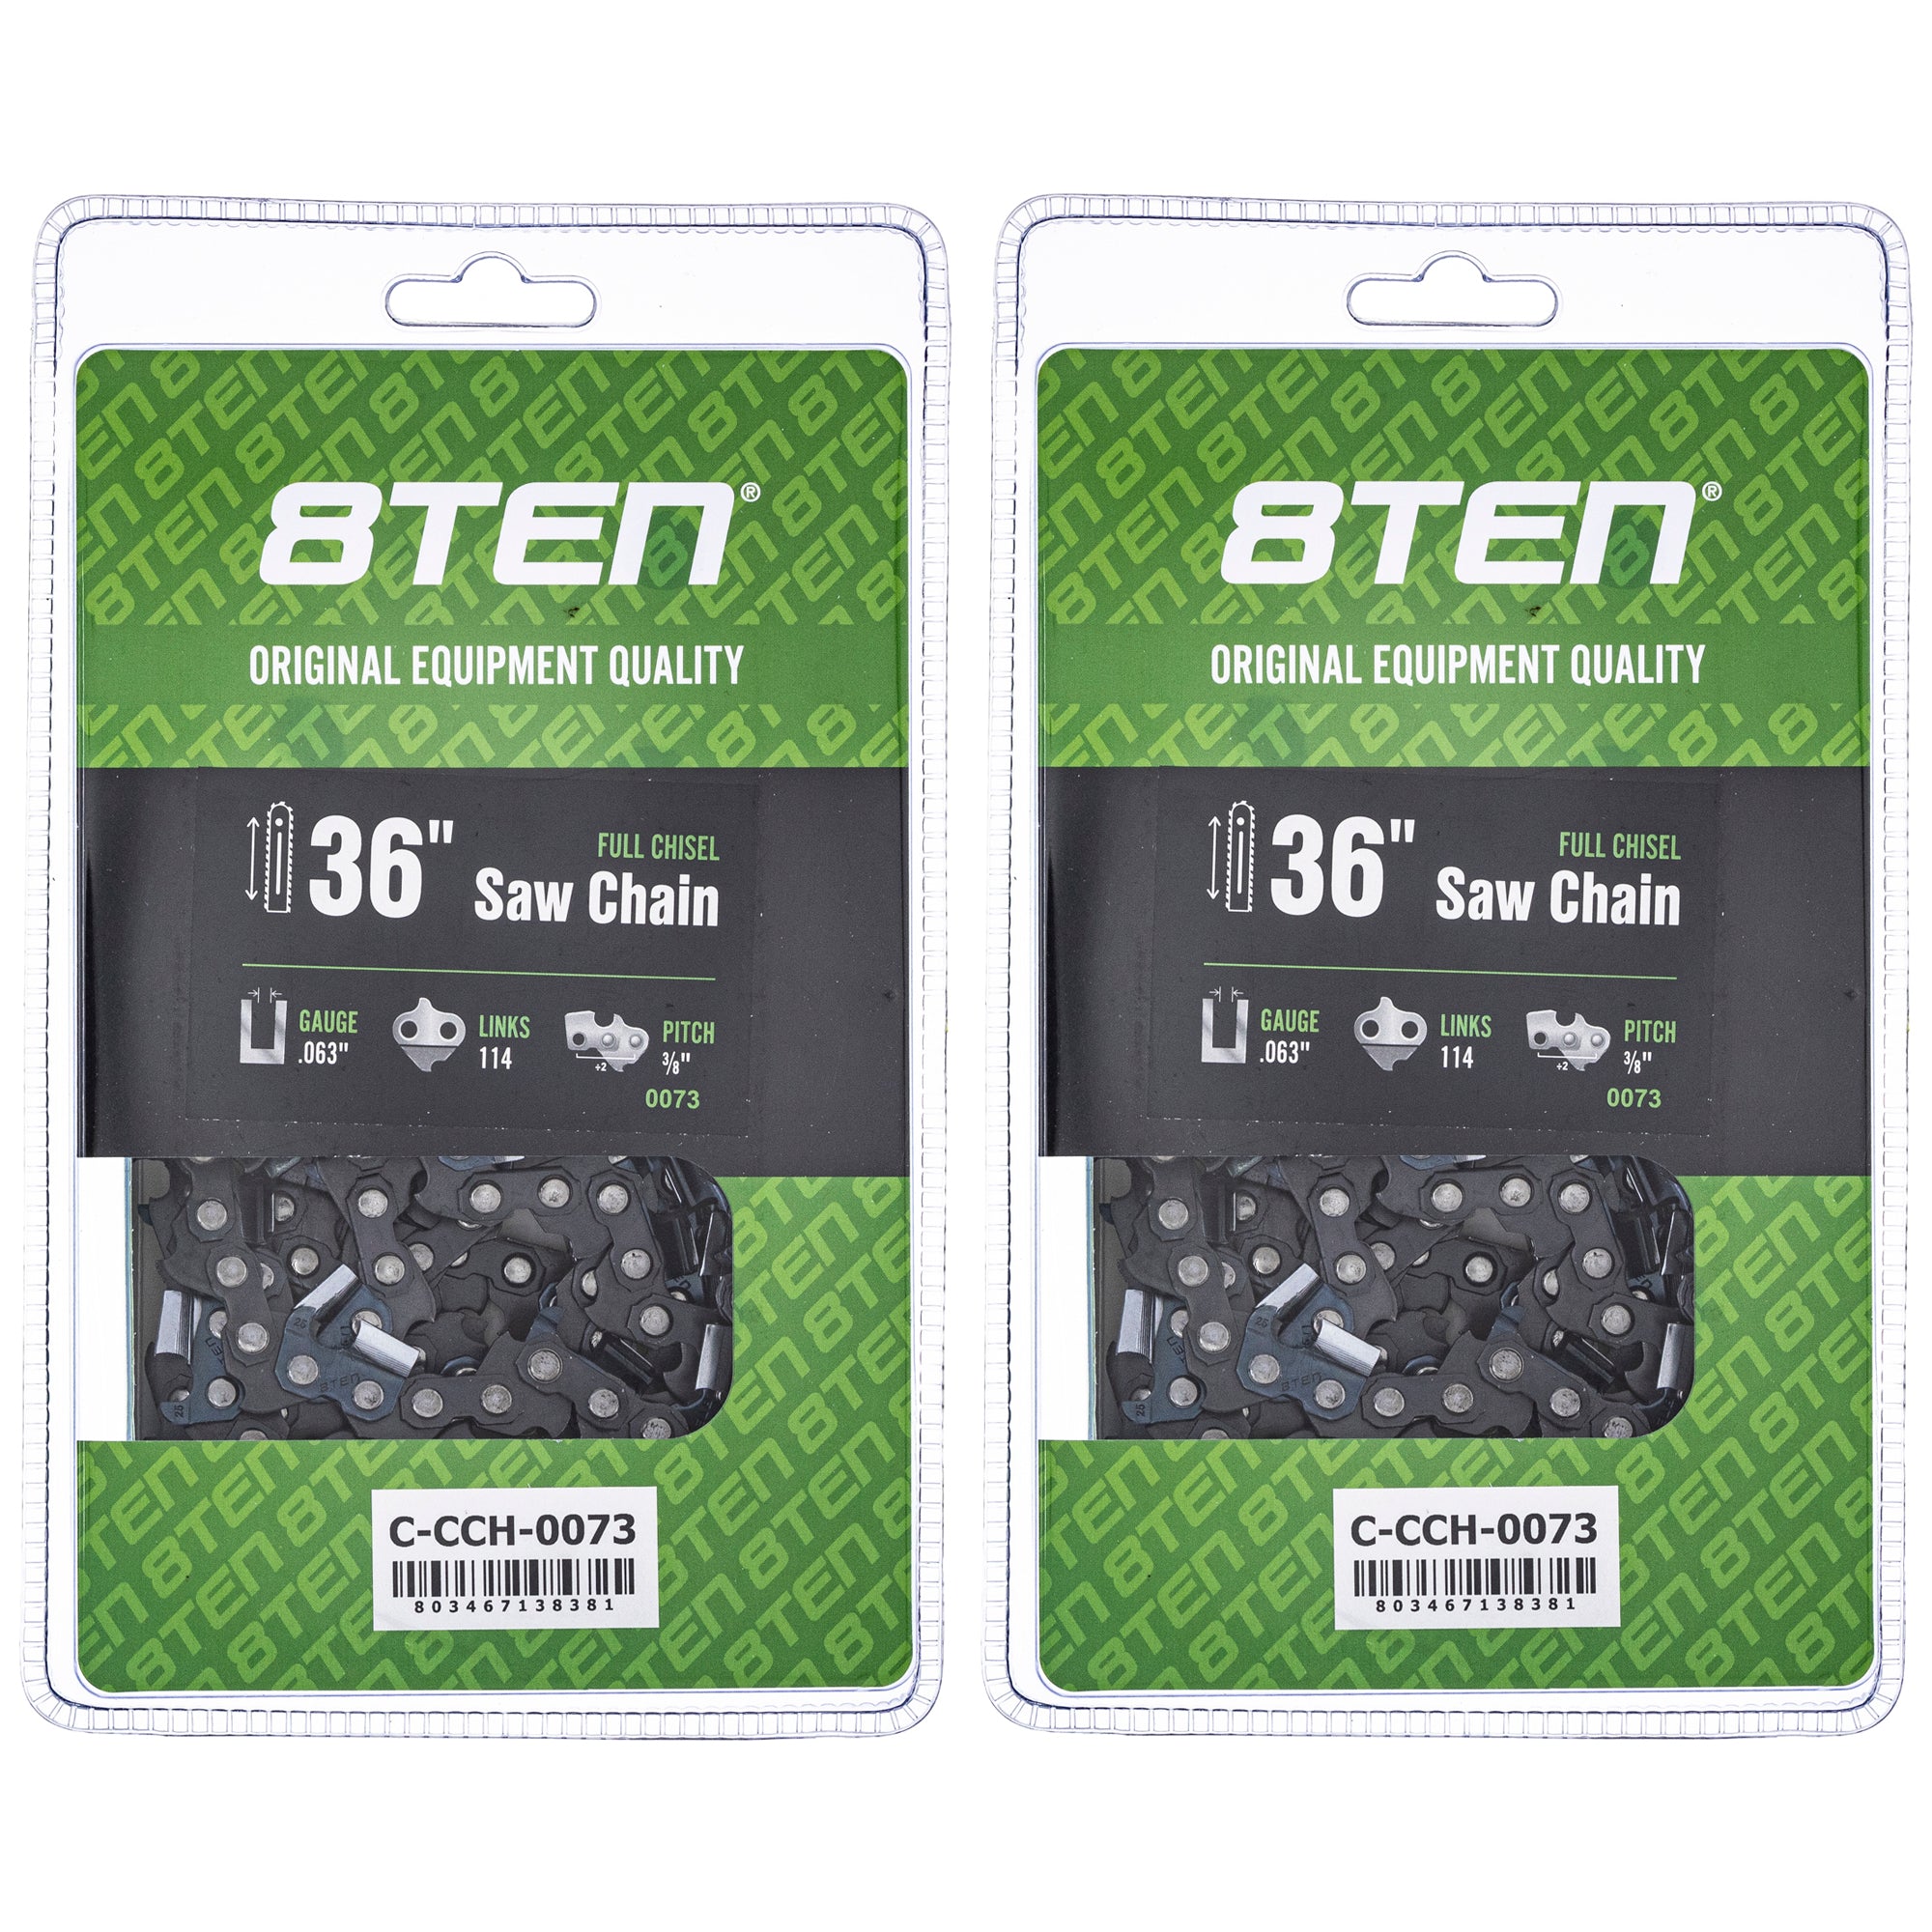 Chainsaw Chain 36 Inch .063 3/8 114DL 2-Pack for zOTHER MSE MS E 634 8TEN 810-CCC2295H